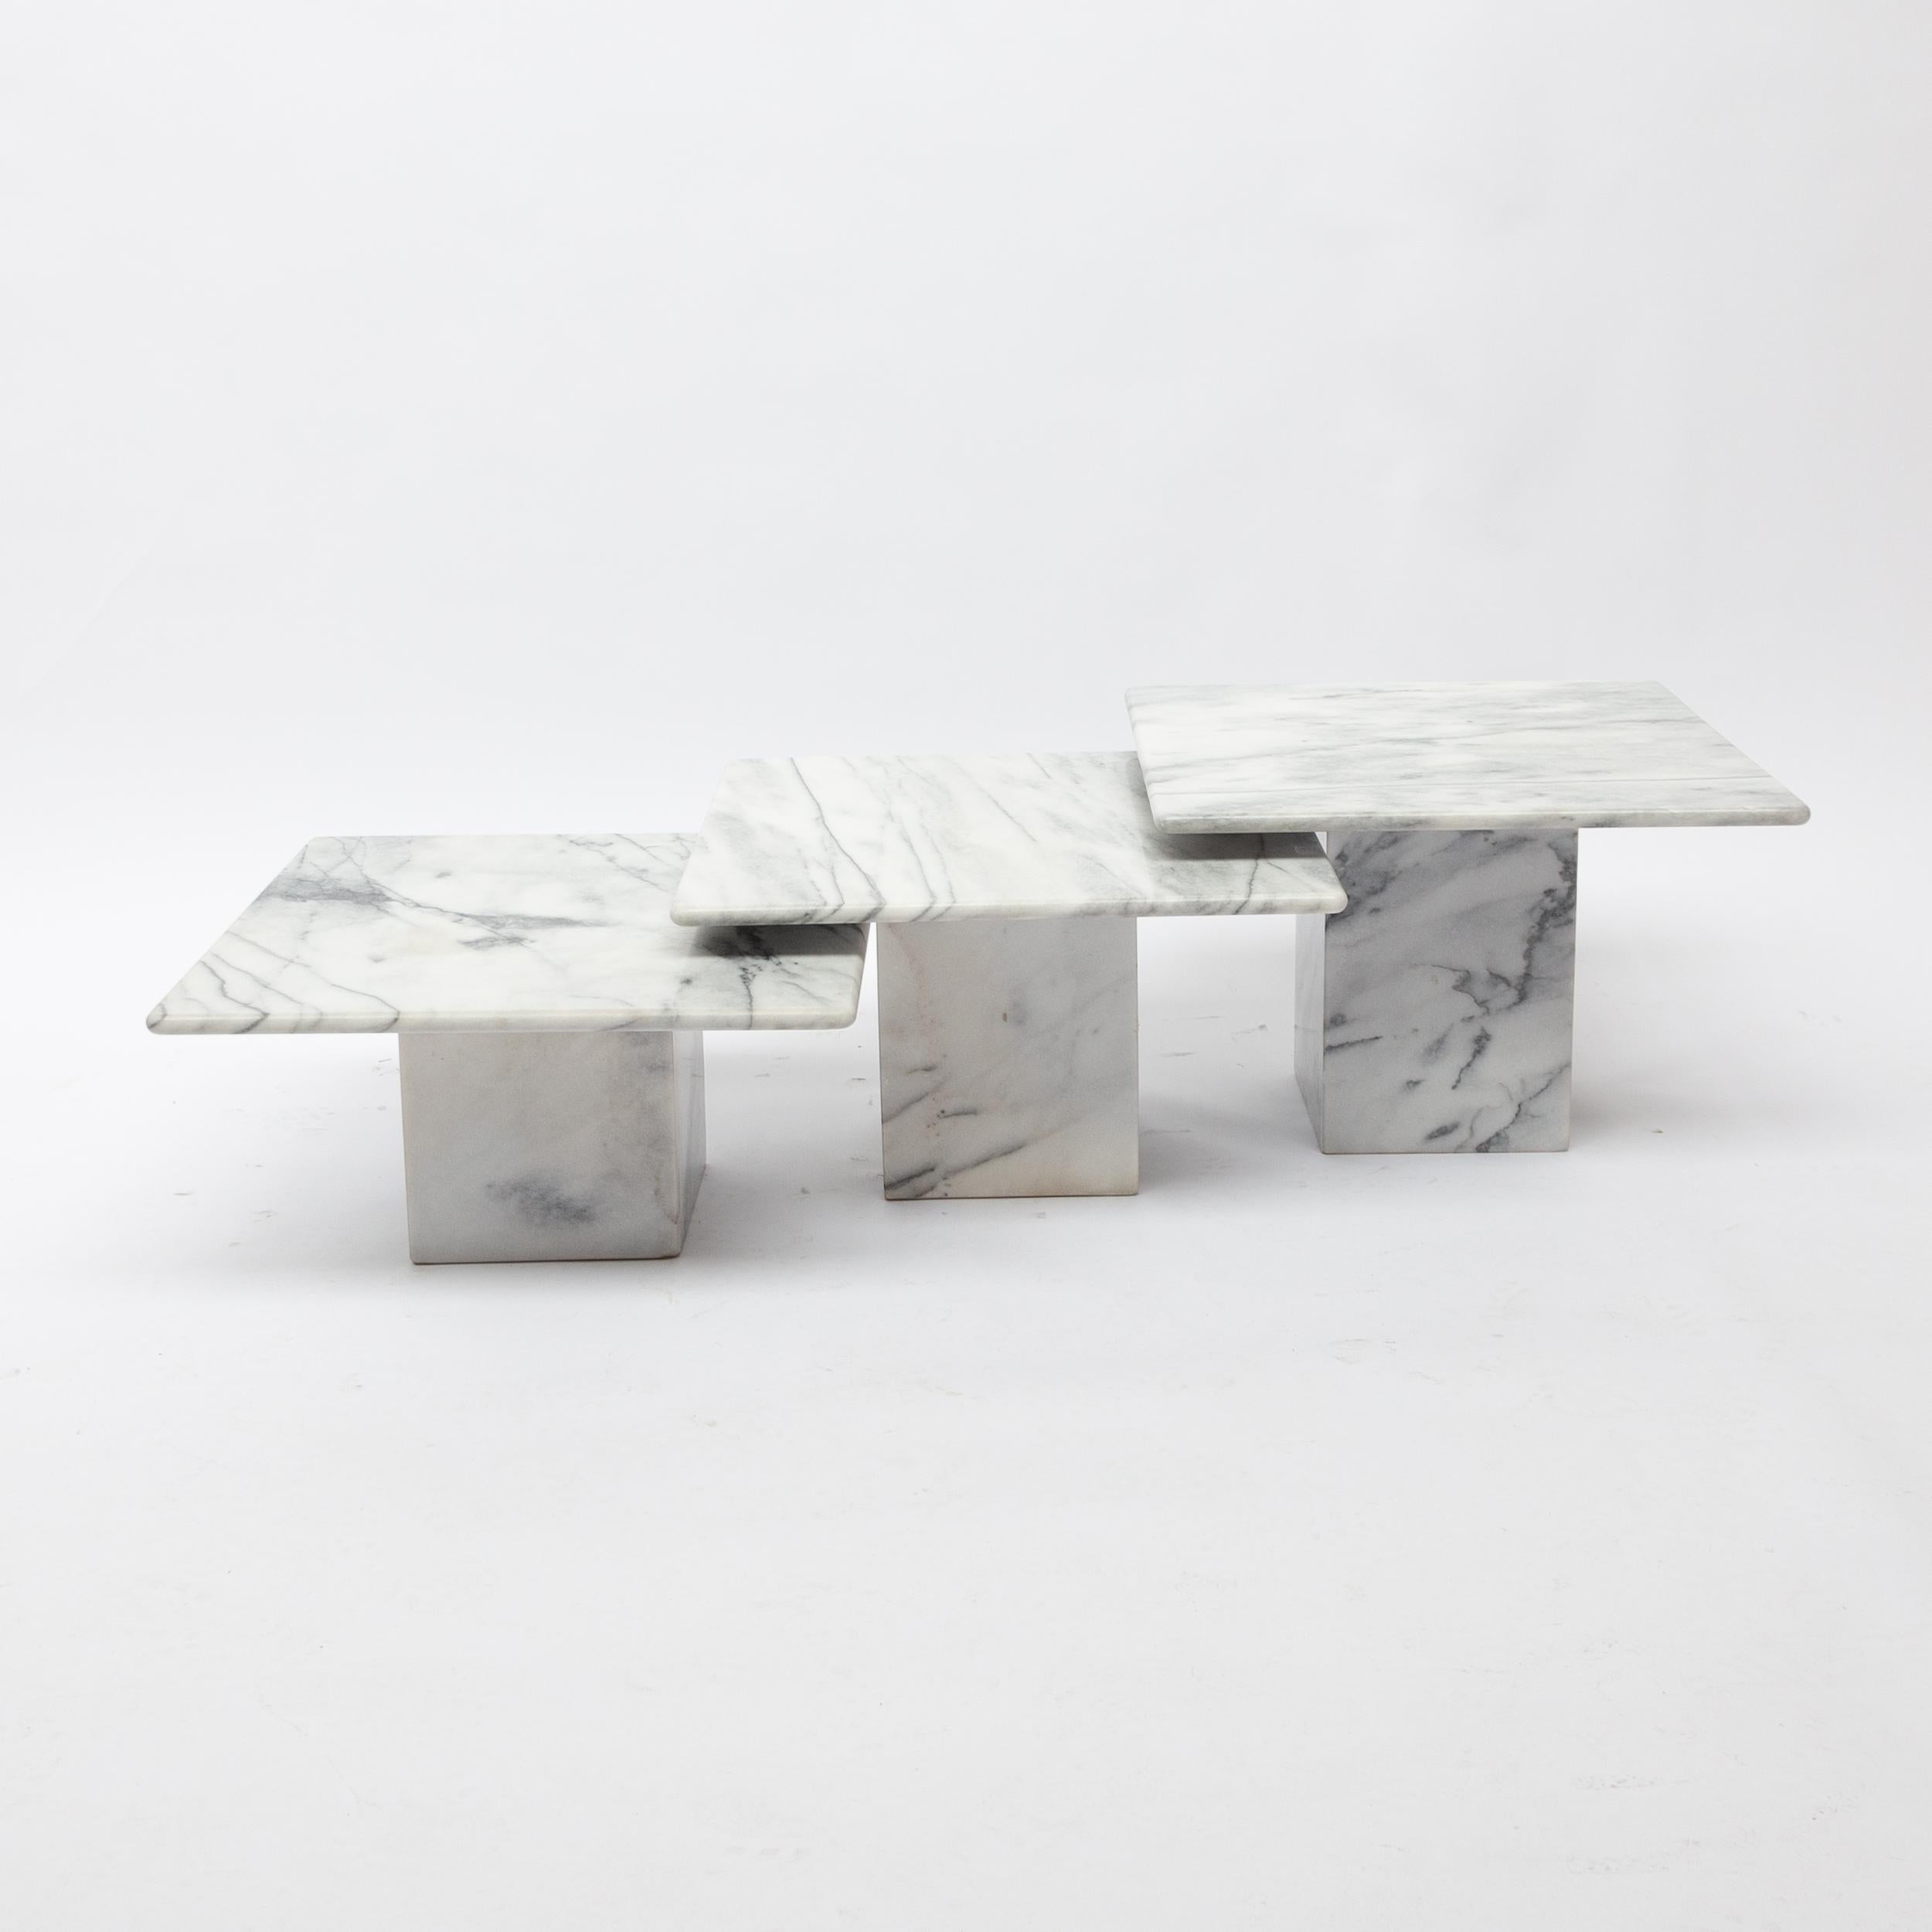 Beautiful set of three elegant coffee/side tables of three different heights in order to be put, for example, one below the other. Made in Italy in the 1970s of full marble of very elegant minimal appearance.

Measures: Table 1 60 x 60 x 40